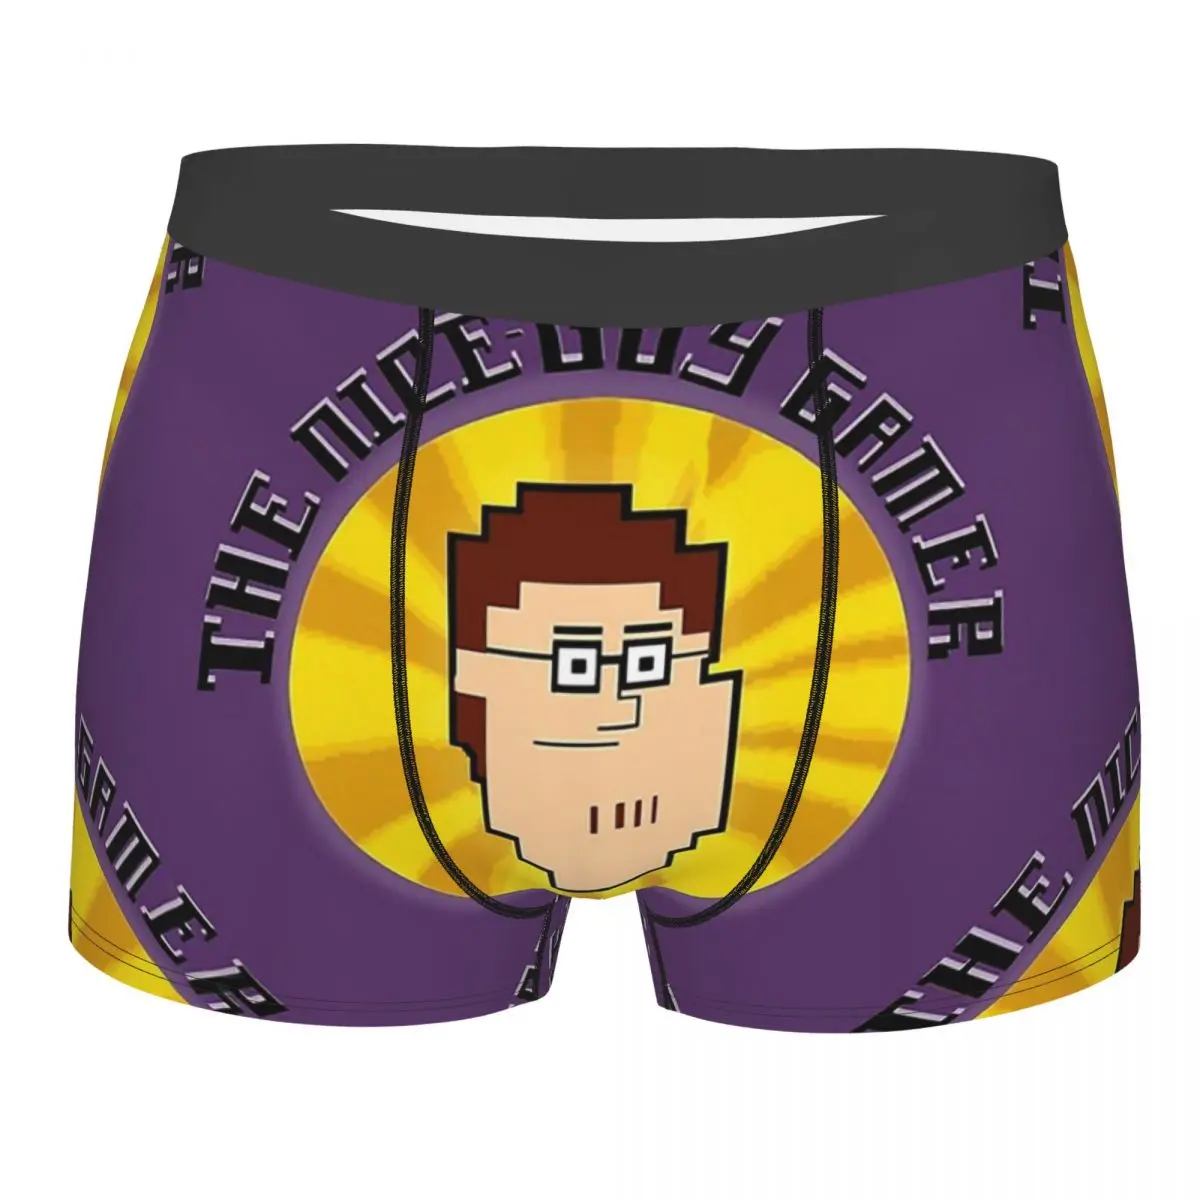 

Sam The Nice Guy Gamer Total Drama Chef Hatchet Animated Underpants Homme Panties Man Underwear Comfortable Shorts Boxer Briefs